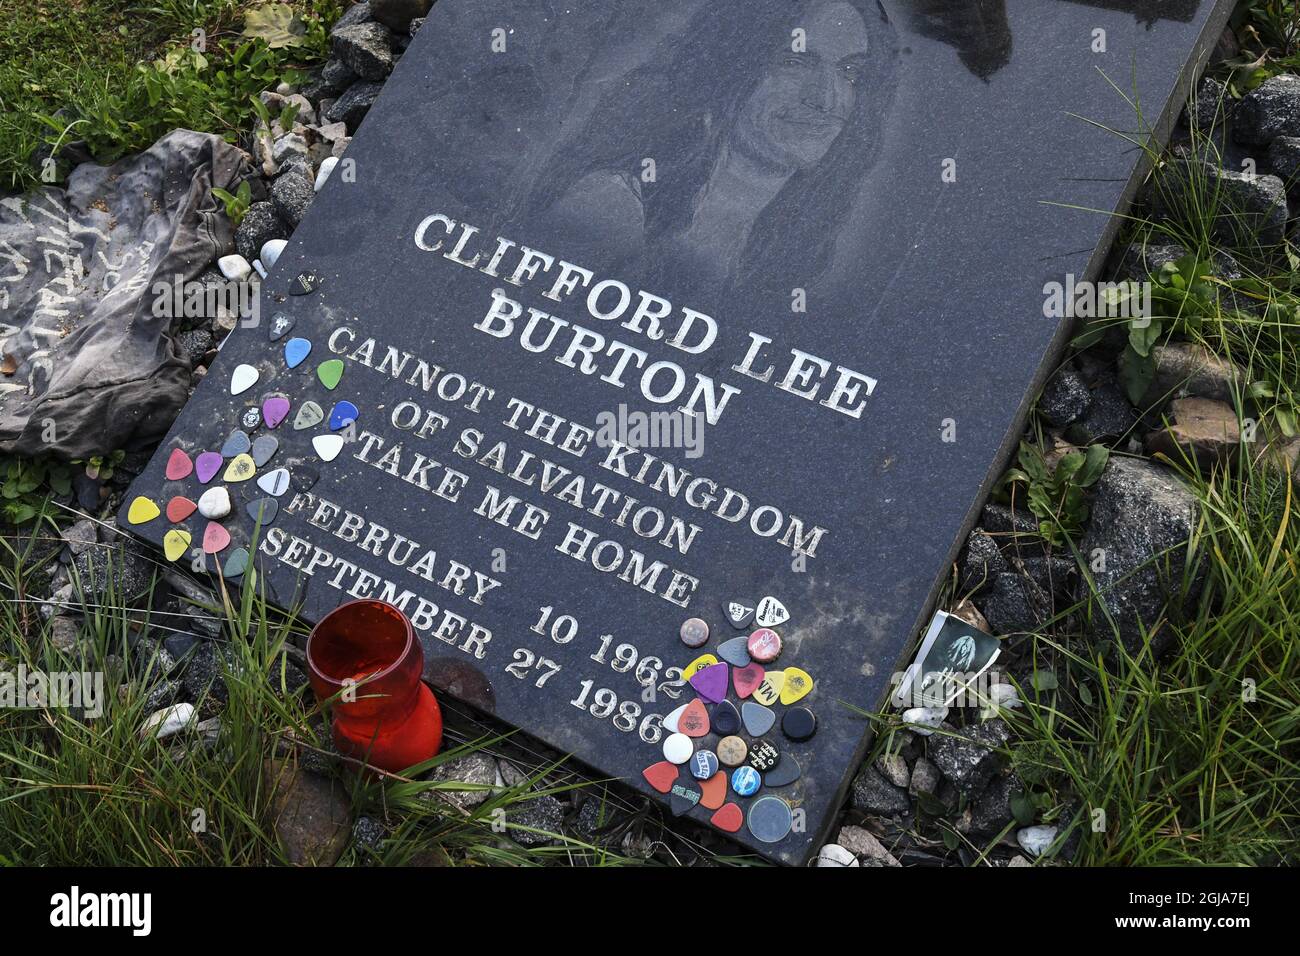 DORARP 2016-09-23 Guitar pics,candles, flowers and greeting from fans are  seen at the memorial stone for late musician Cliff Burton new Dorarps,  South Sweden, September 23, 2016 Clifford Lee Burton died when